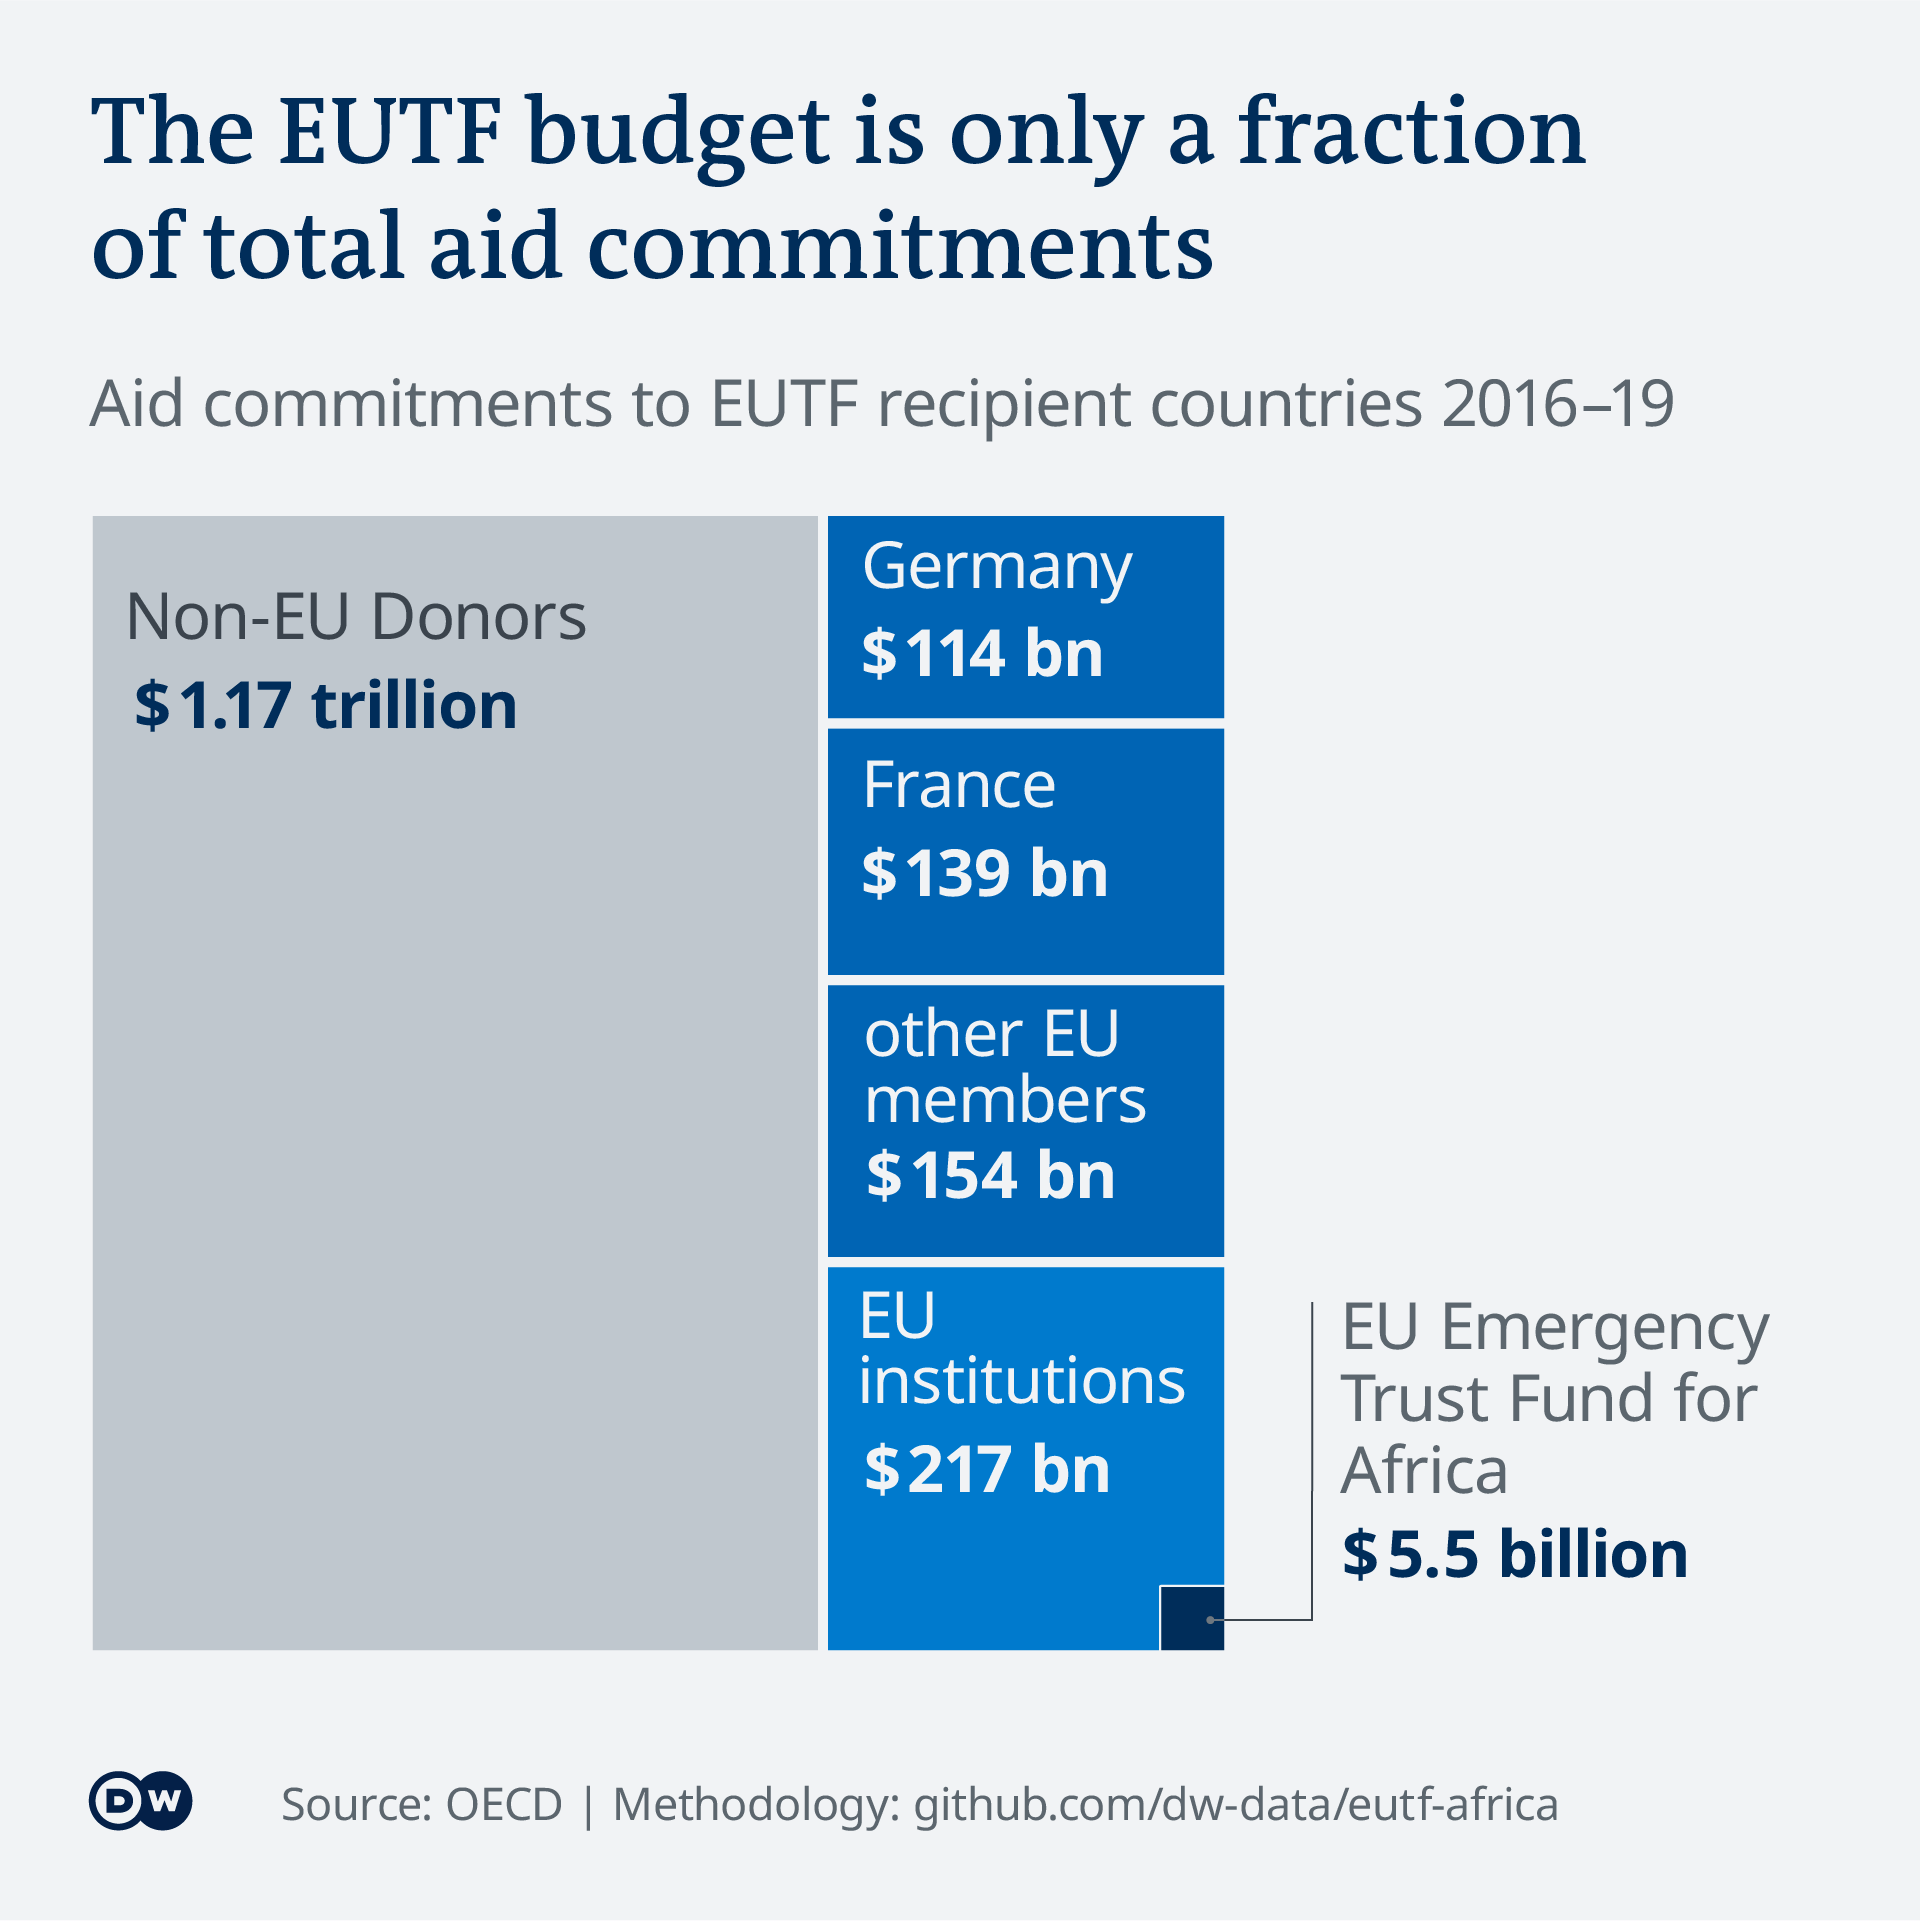 Data visualization shows the EUTF development aid budget for the 2016-2020 period